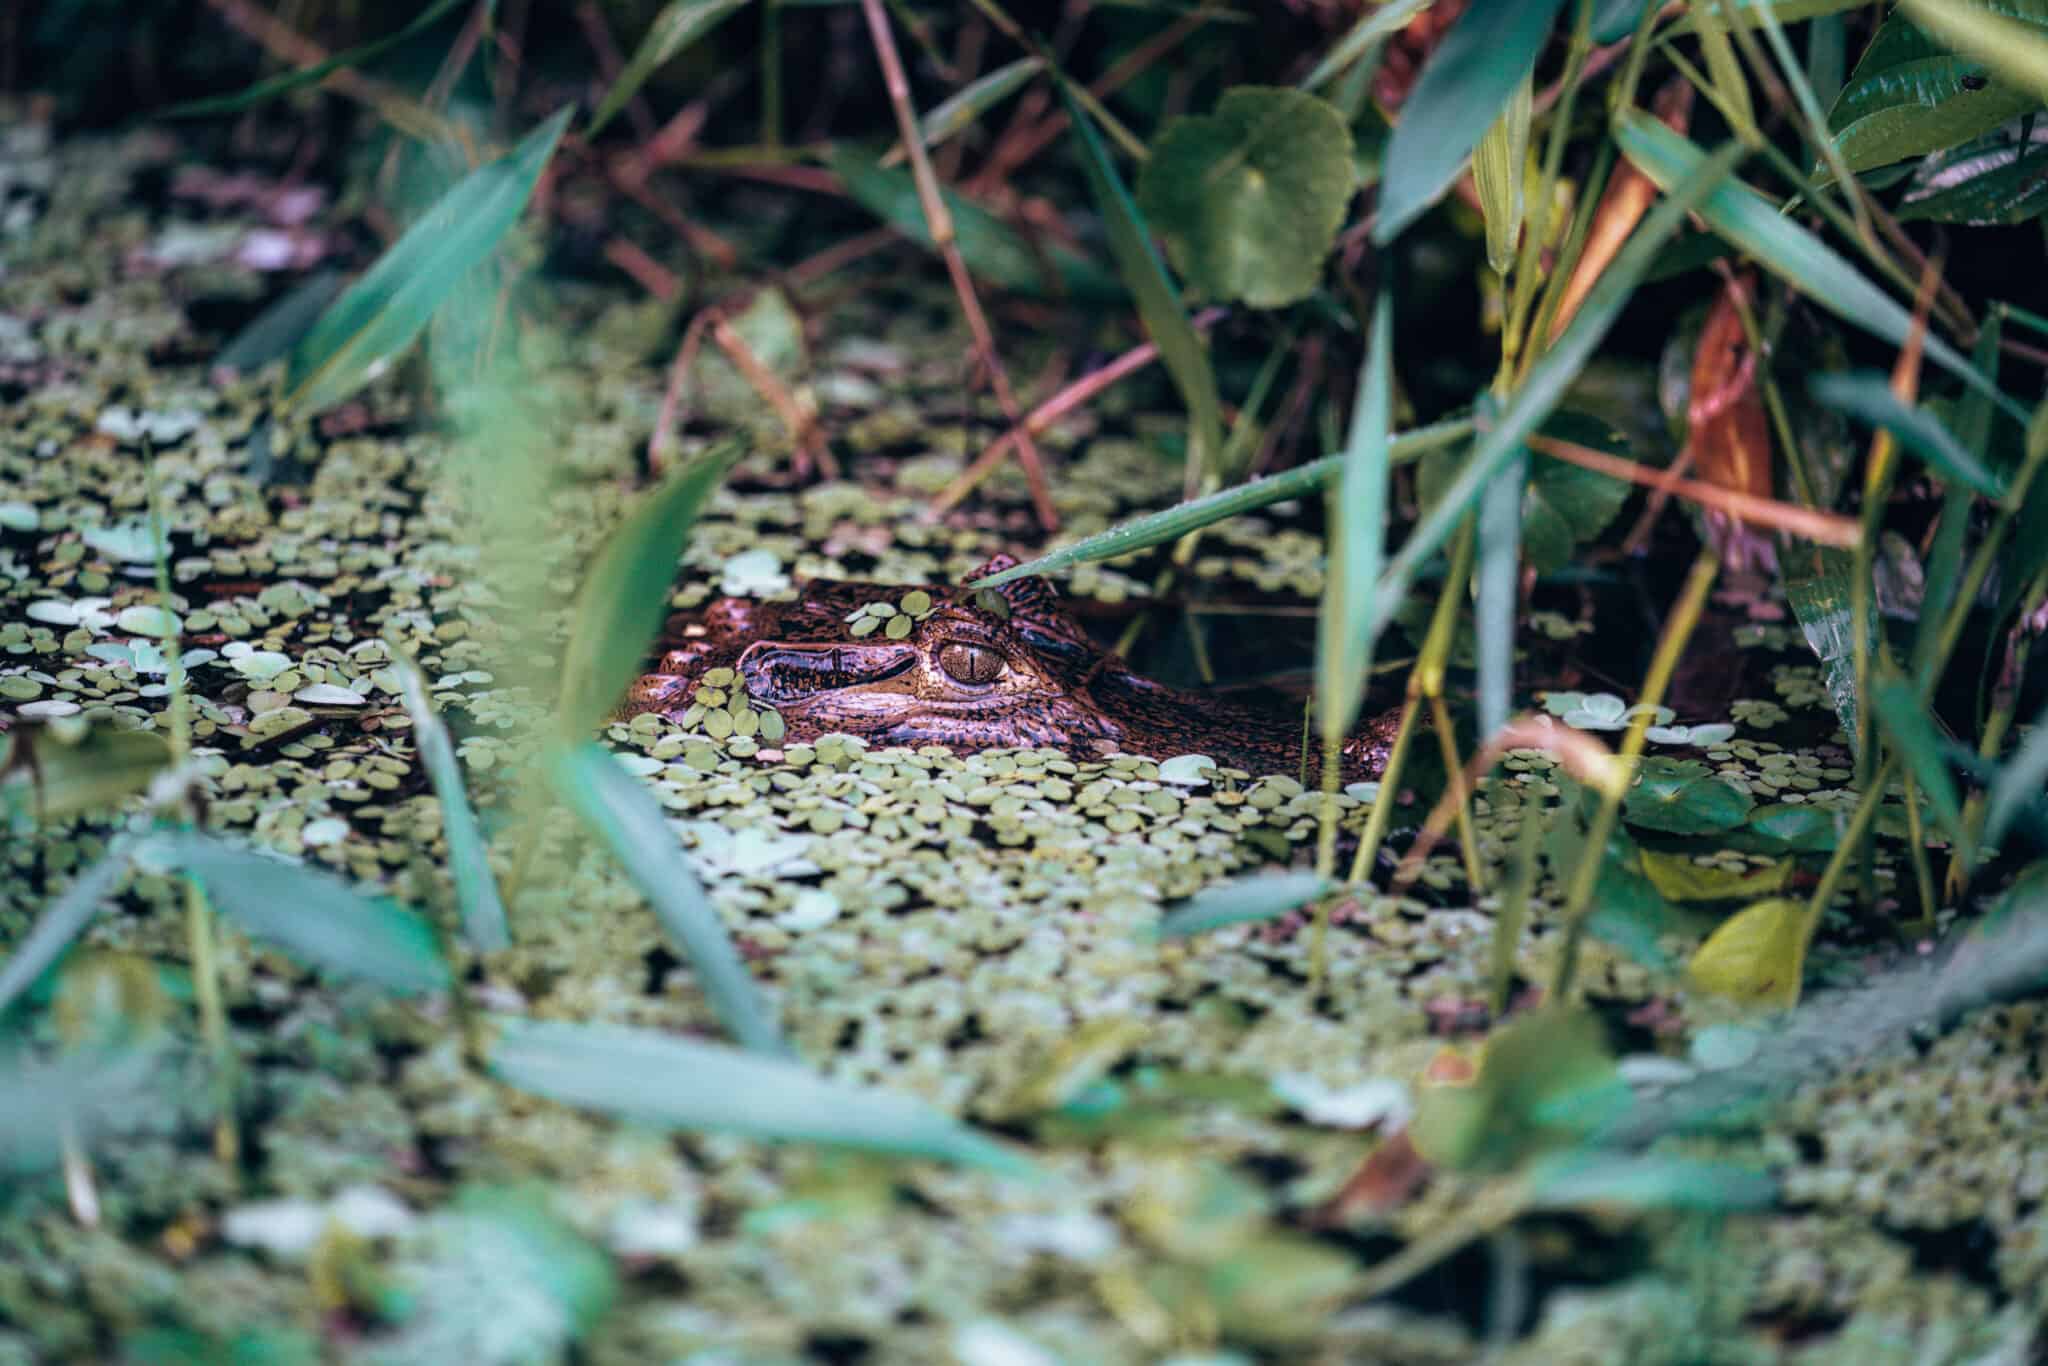 A frog is sitting in a pond full of lily pads in Tortuguero, Costa Rica.